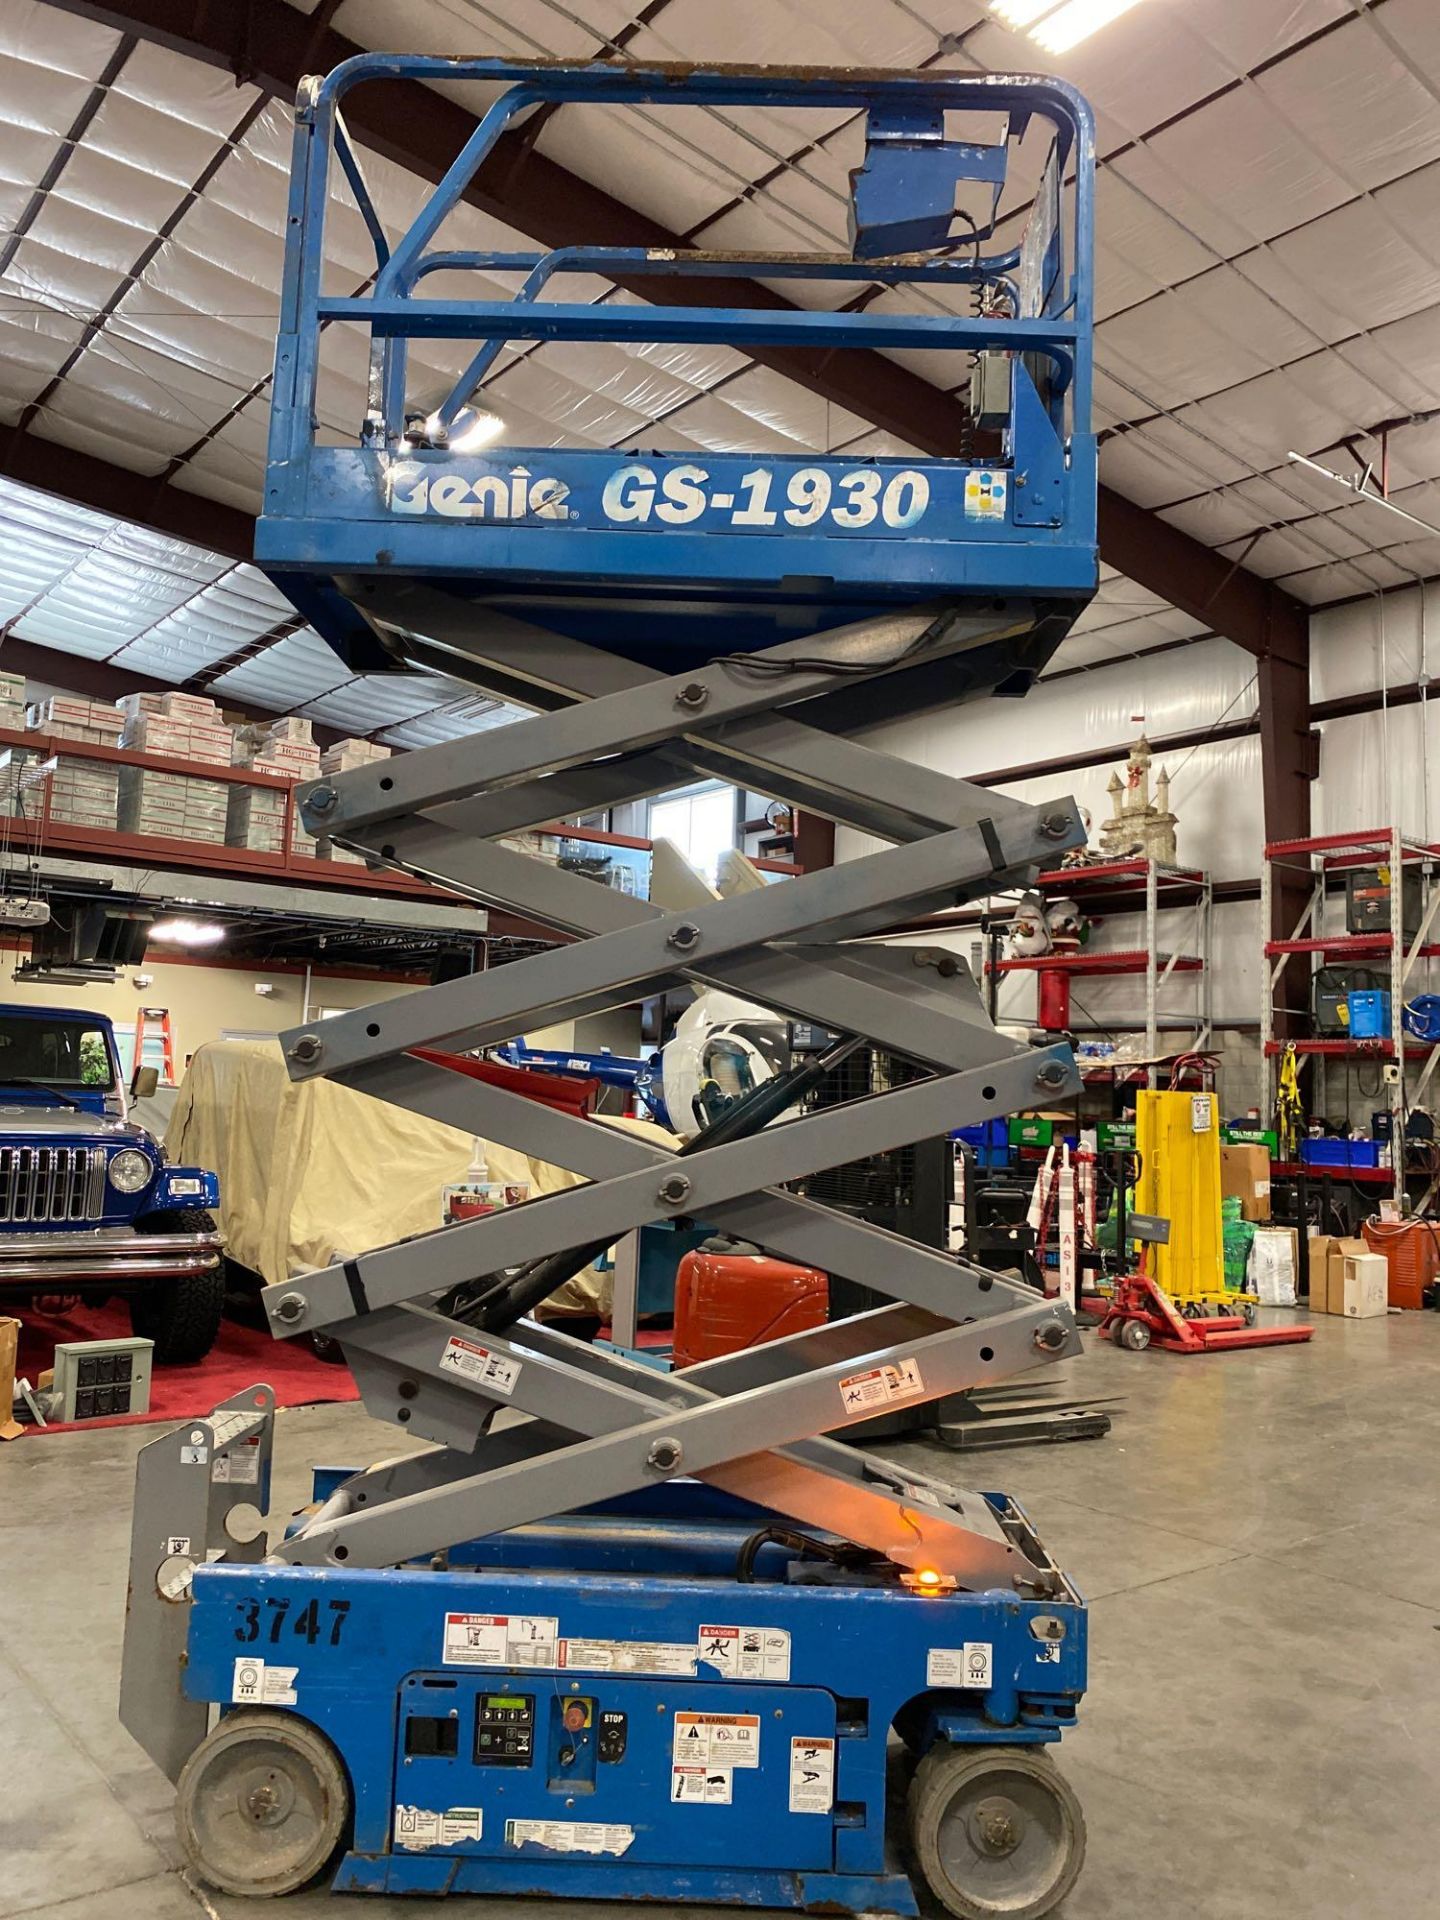 2017 GENIE GS1930 SCISSOR LIFT, SELF PROPELLED, 19' PLATFORM HEIGHT, BUILT IN BATTERY CHARGER, SLIDE - Image 6 of 6